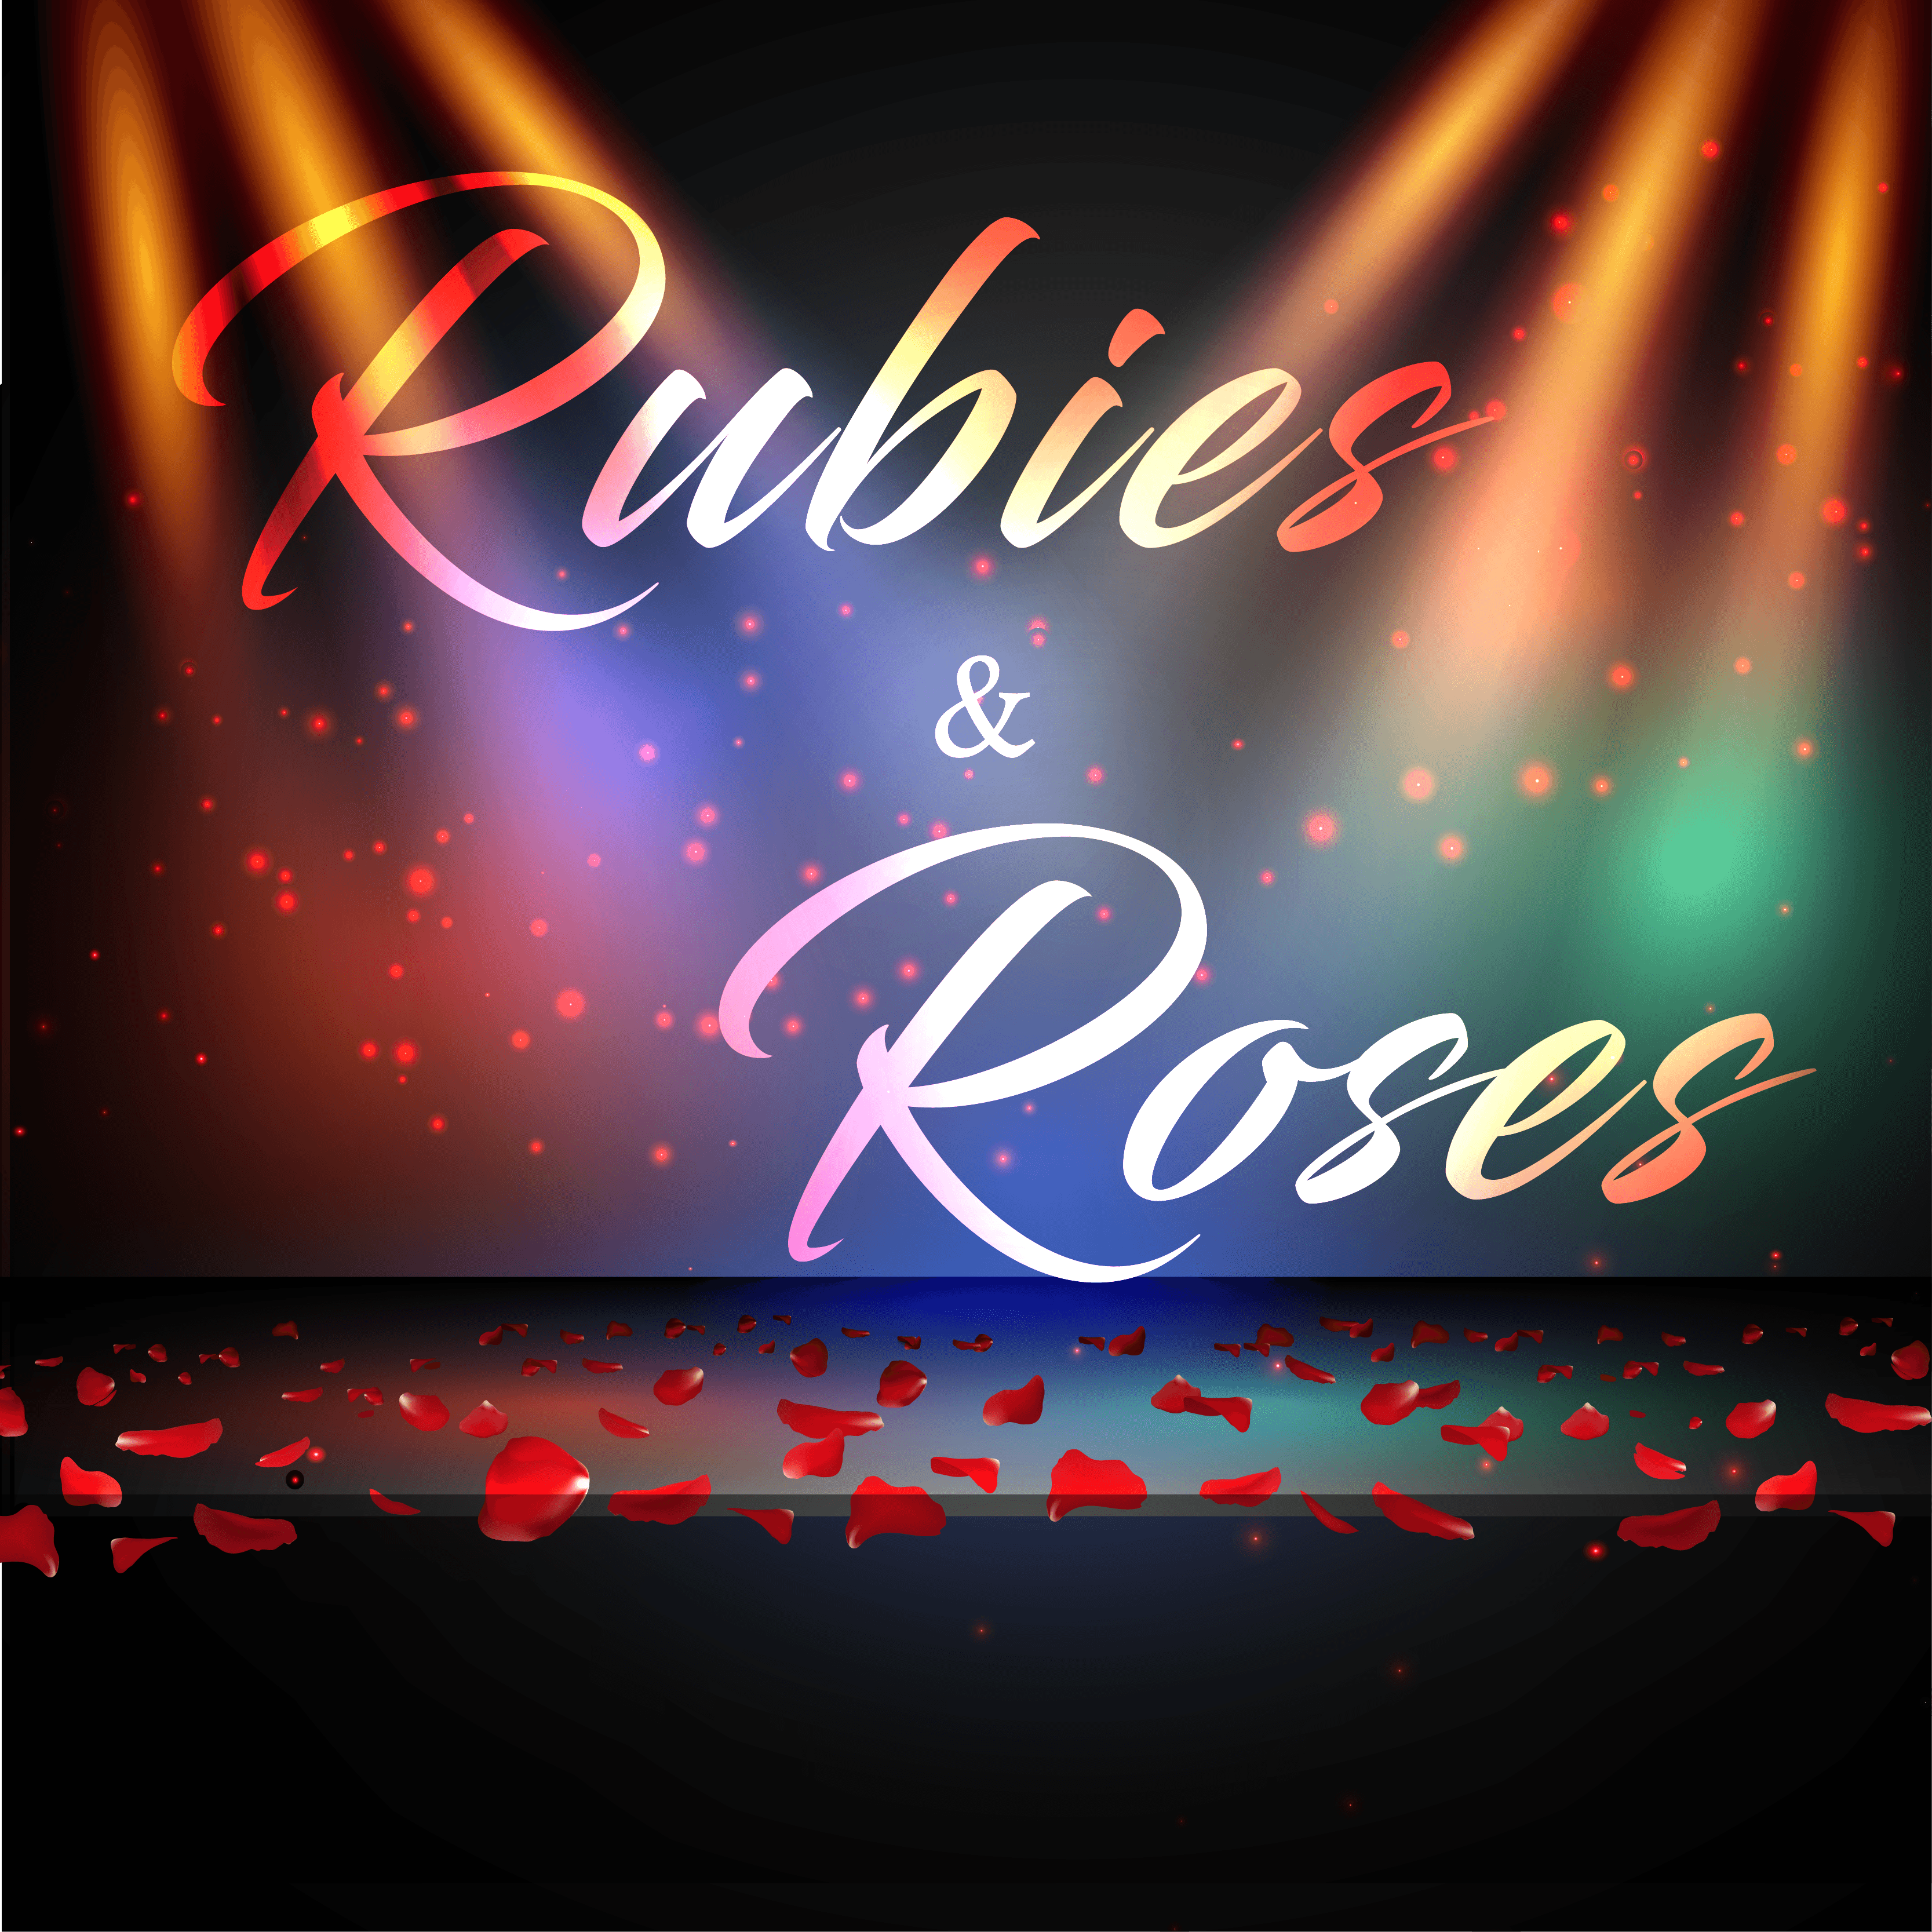 Rubies and Roses 2022